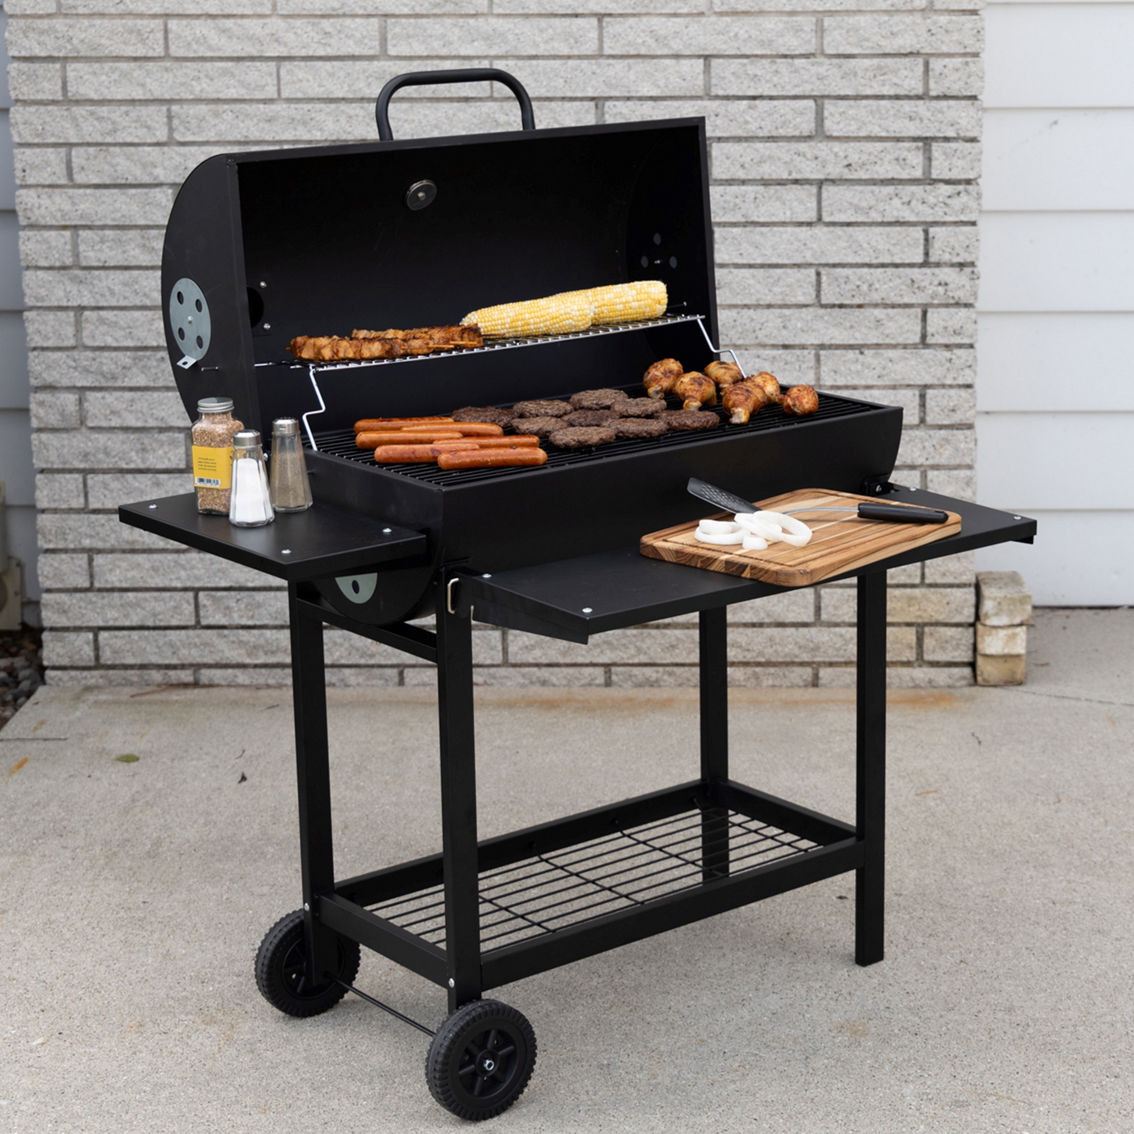 Chard 30 in. Charcoal Barrel Grill with Side Shelf - Image 3 of 10